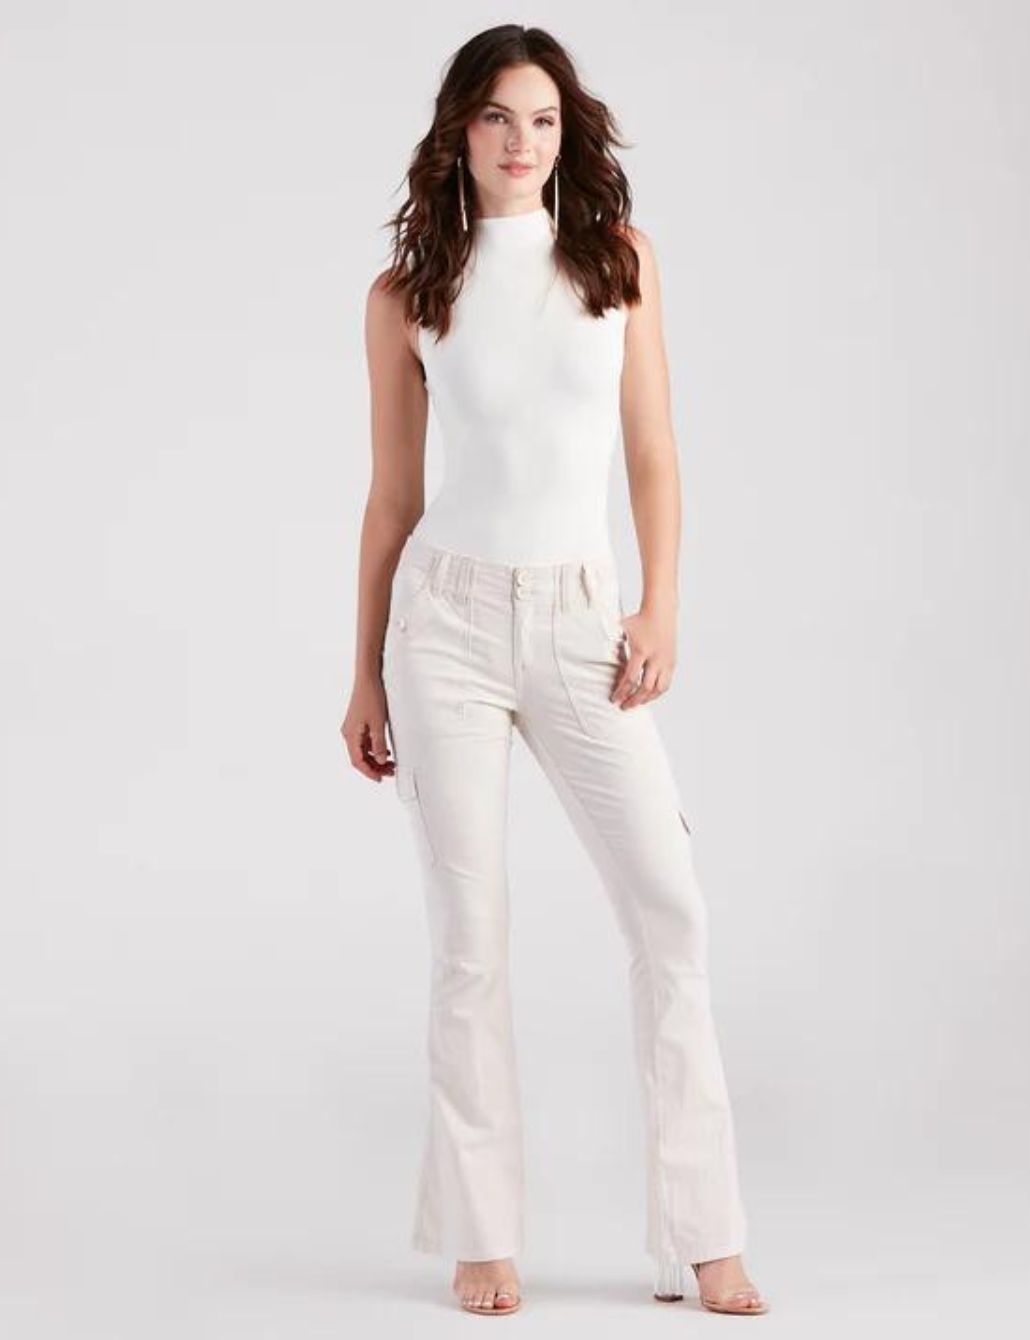 White Leather Belt with White Pants Outfits For Women (5 ideas & outfits) |  Lookastic